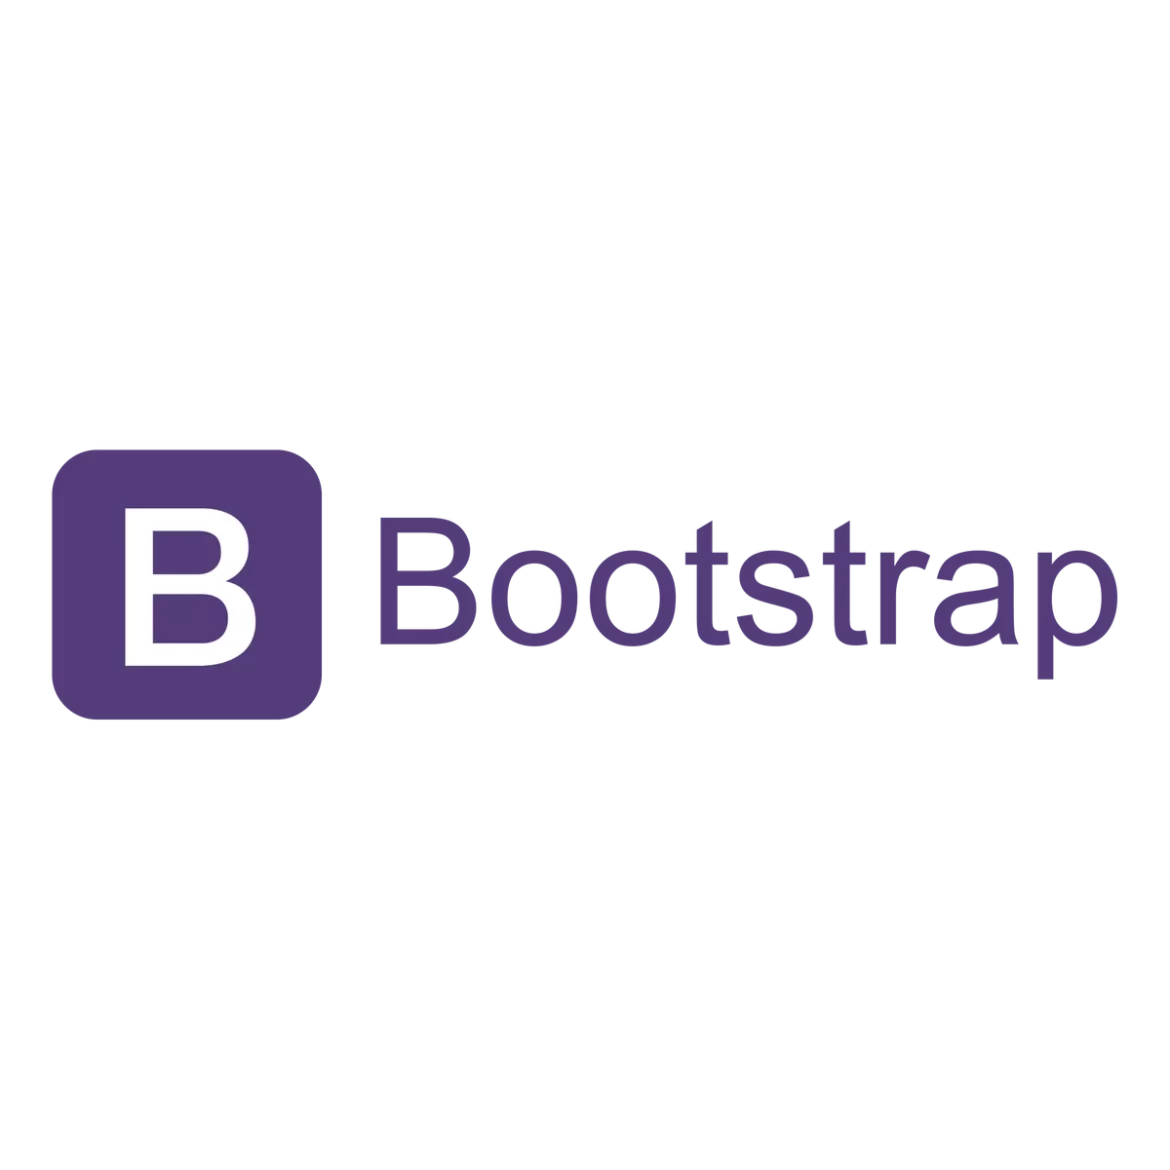 Bootstrap download. Bootstrap. Картинка Bootstrap. Bootstrap лого. CSS-фреймворк: Bootstrap.